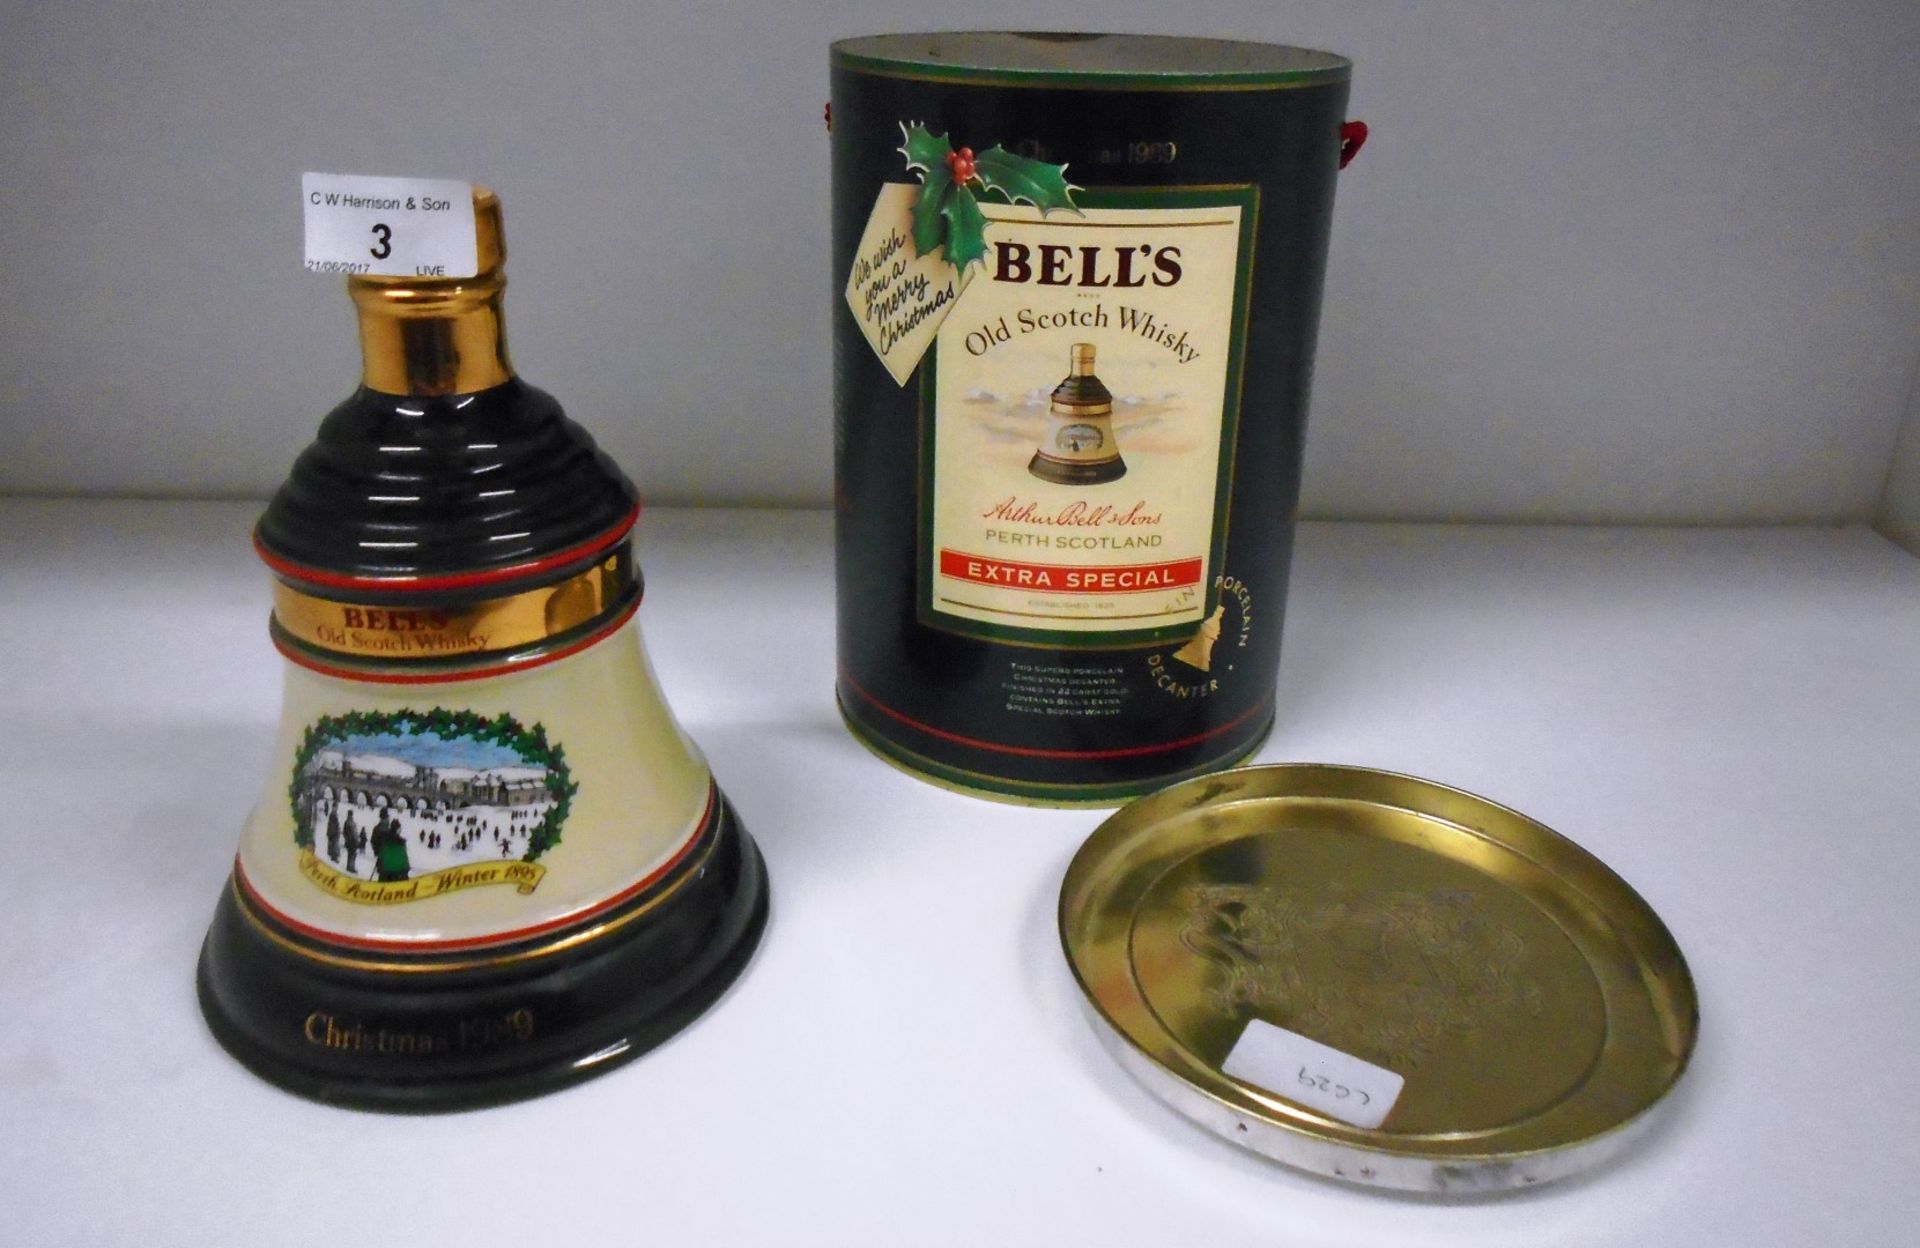 A 75cl decanter of Bell's Old Scotch Whisky to commemorate Christmas 1989 complete with